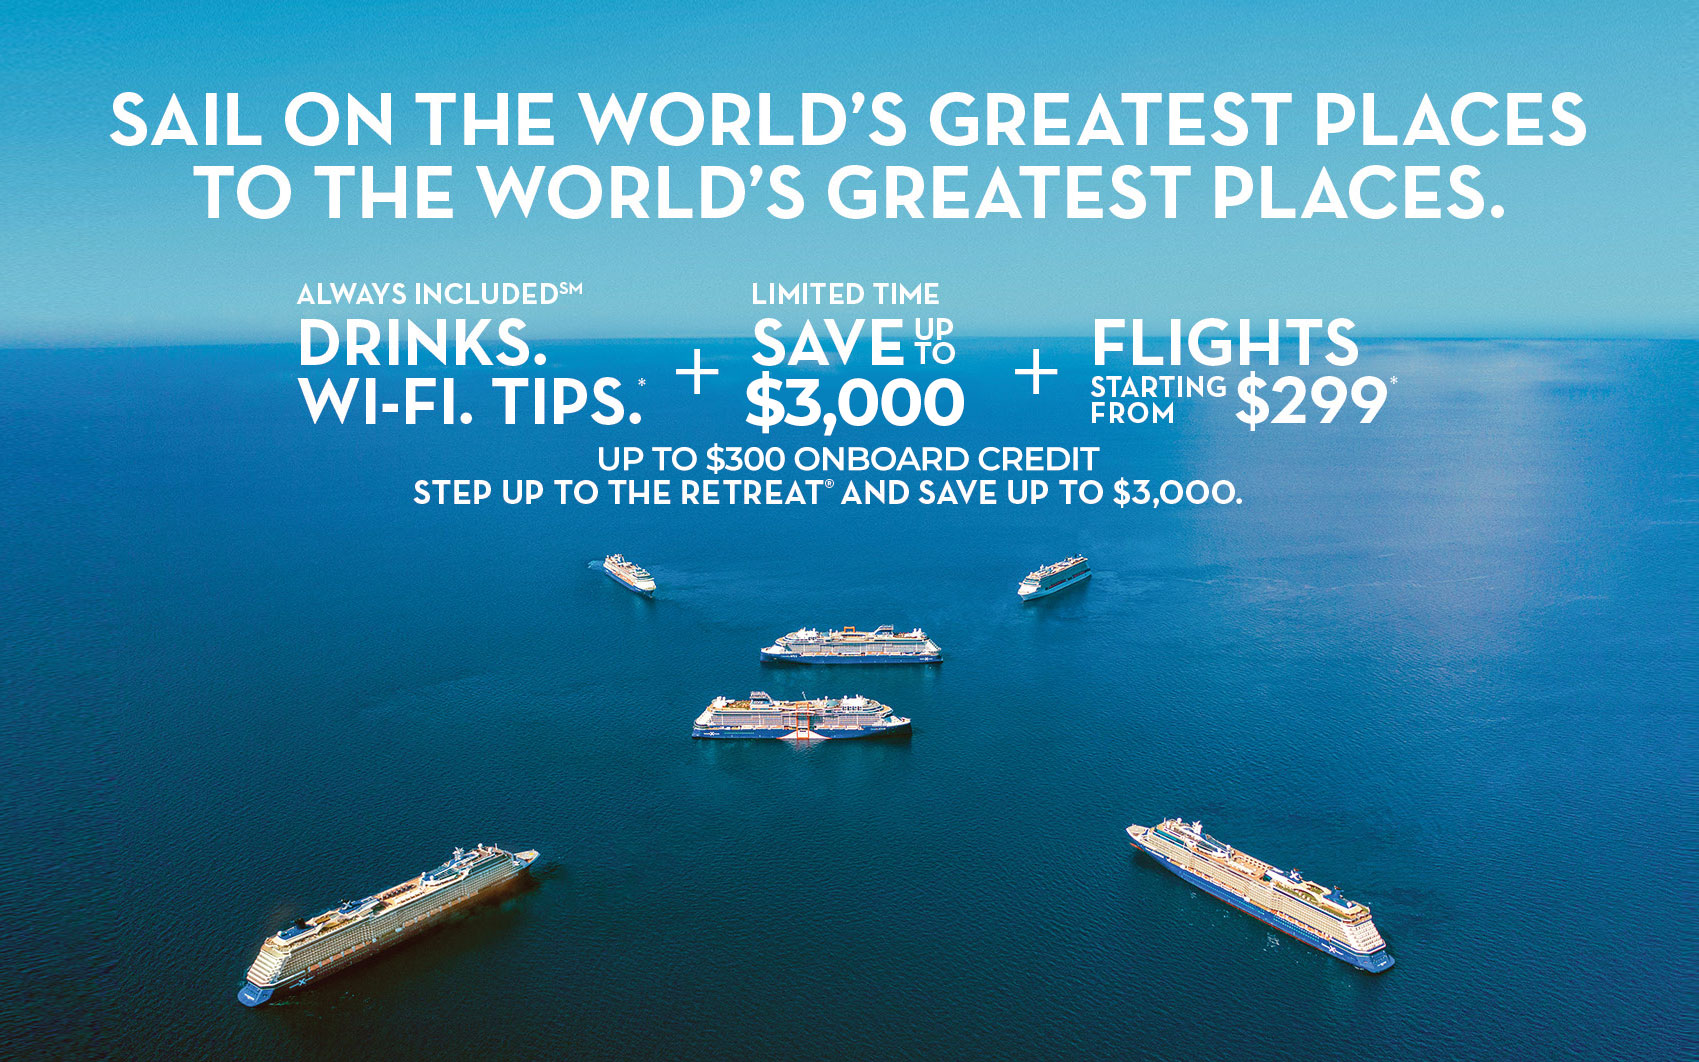 Europe Cruise  | Save up to $3,000* off + up to $300 onboard credit + Air from $299* with Celebrity Cruises!